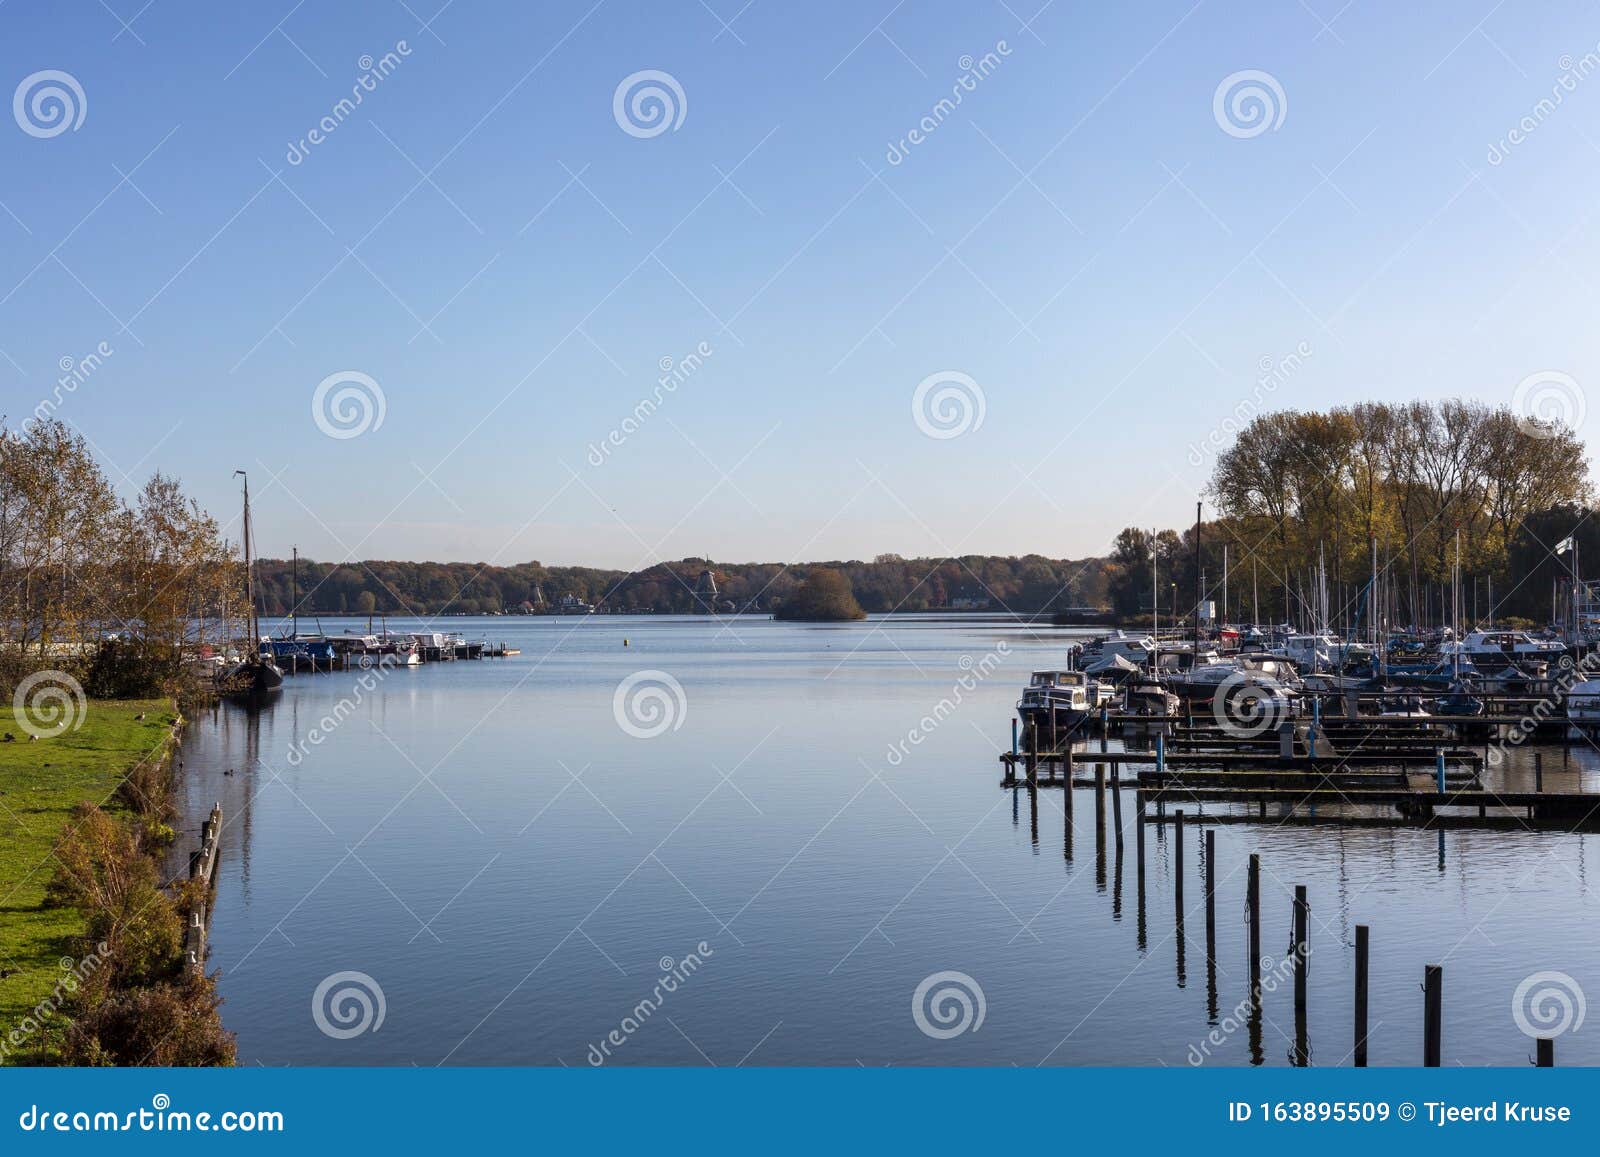 on the Skyline of Rotterdam As Seen from the Kralingse Bos Stock Image - Image of landmark, europe: